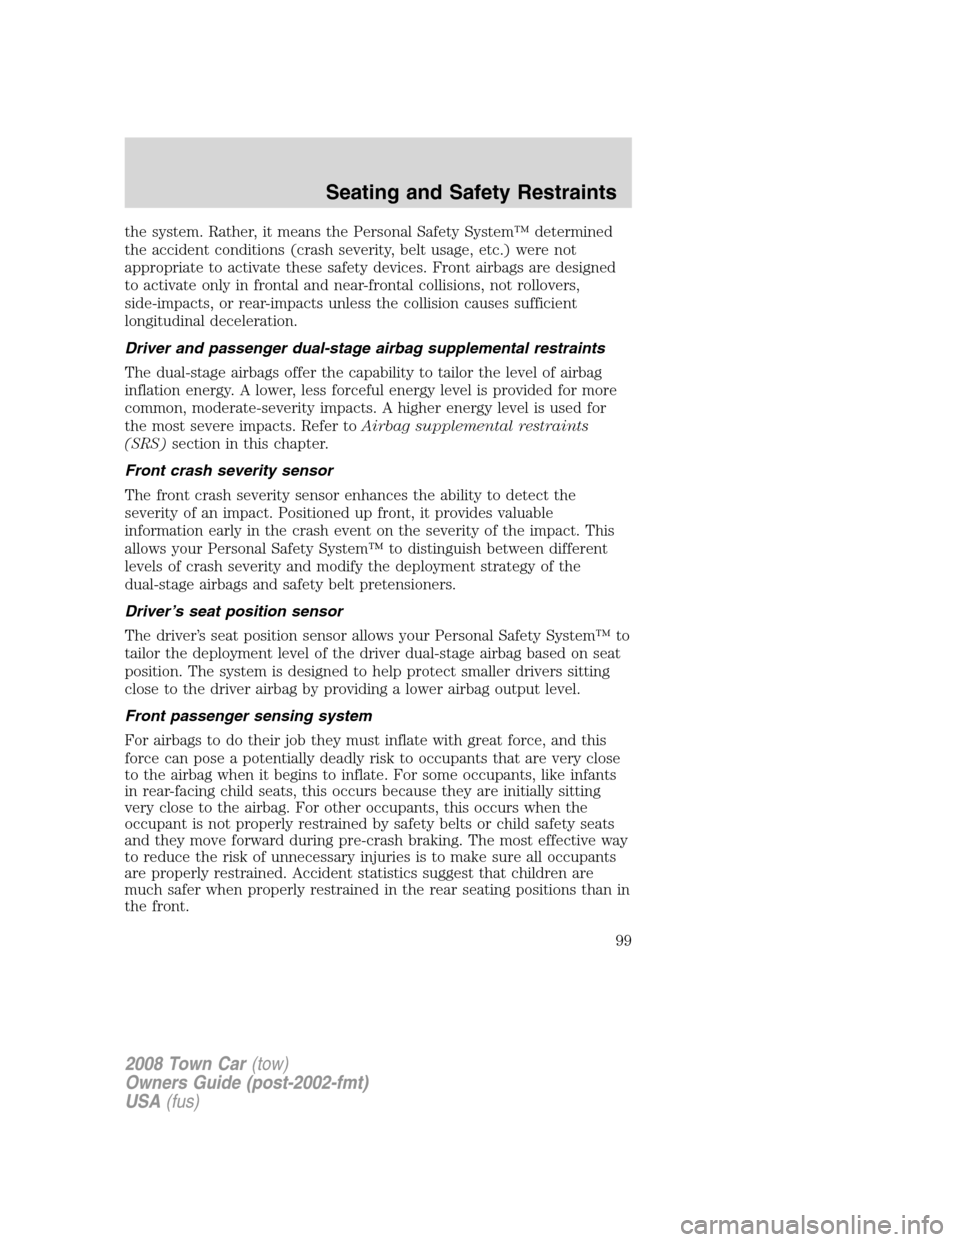 LINCOLN TOWN CAR 2008  Owners Manual the system. Rather, it means the Personal Safety System™ determined
the accident conditions (crash severity, belt usage, etc.) were not
appropriate to activate these safety devices. Front airbags ar